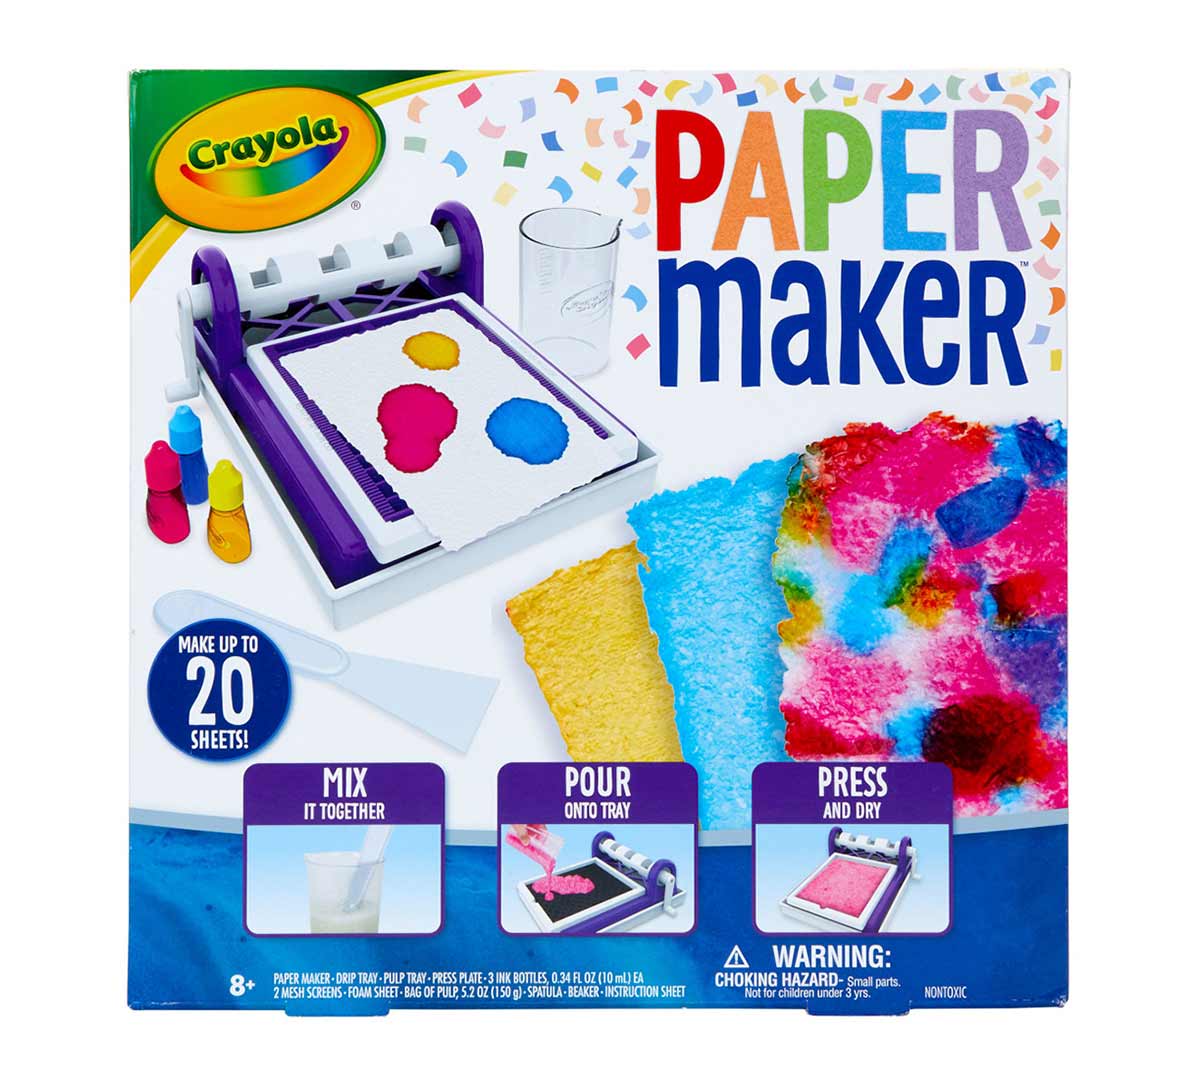 Papermaking Kit, Homemade Paper, Recycled Paper, Diy Kits for